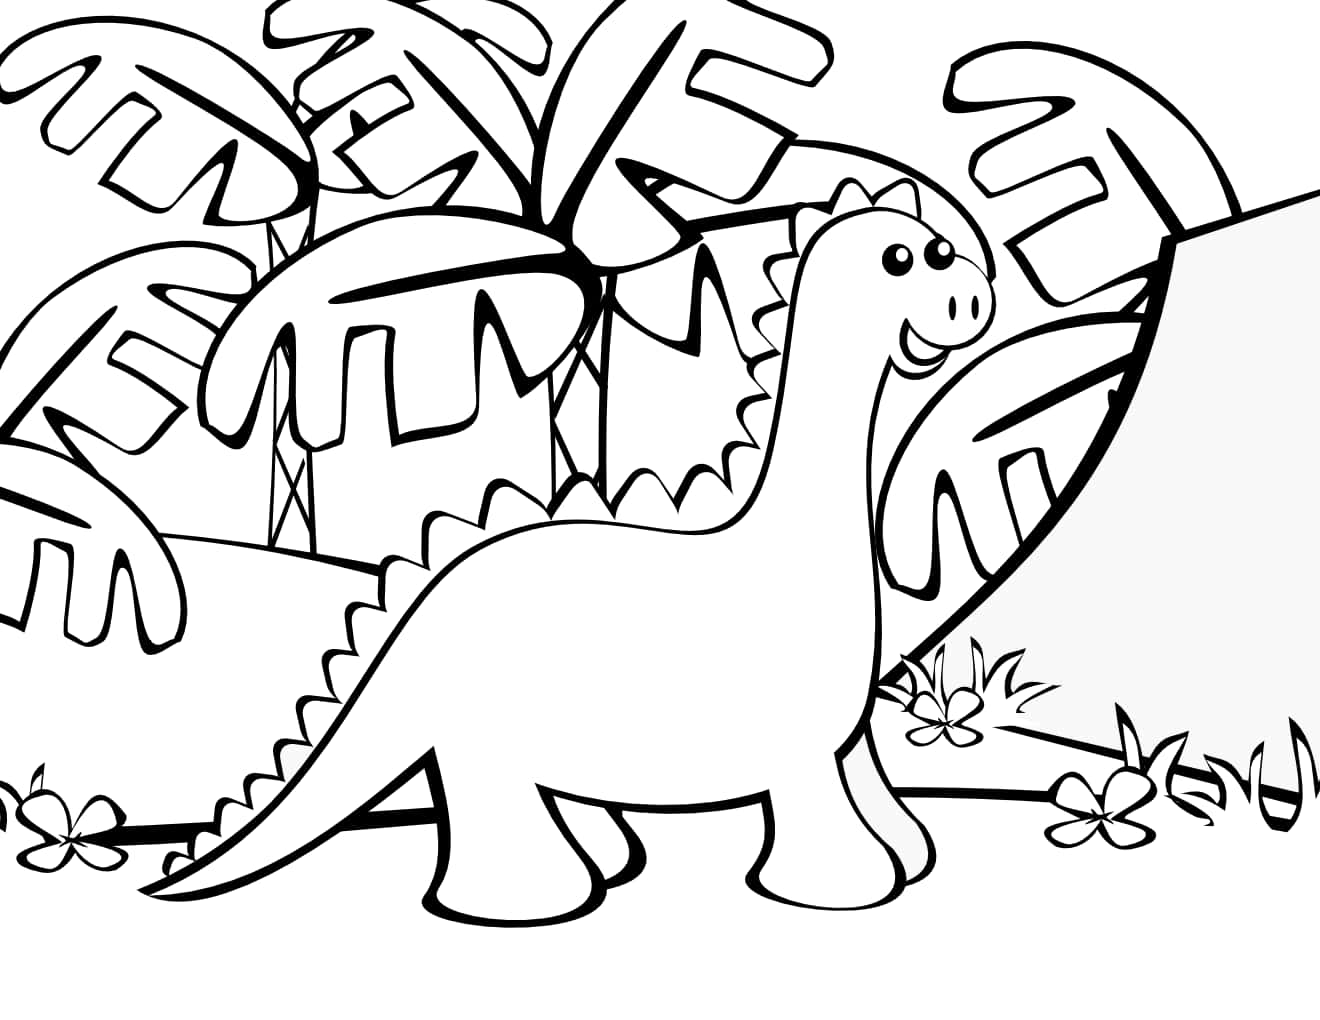 Coloring a Dinosaur - Fun for All Ages!